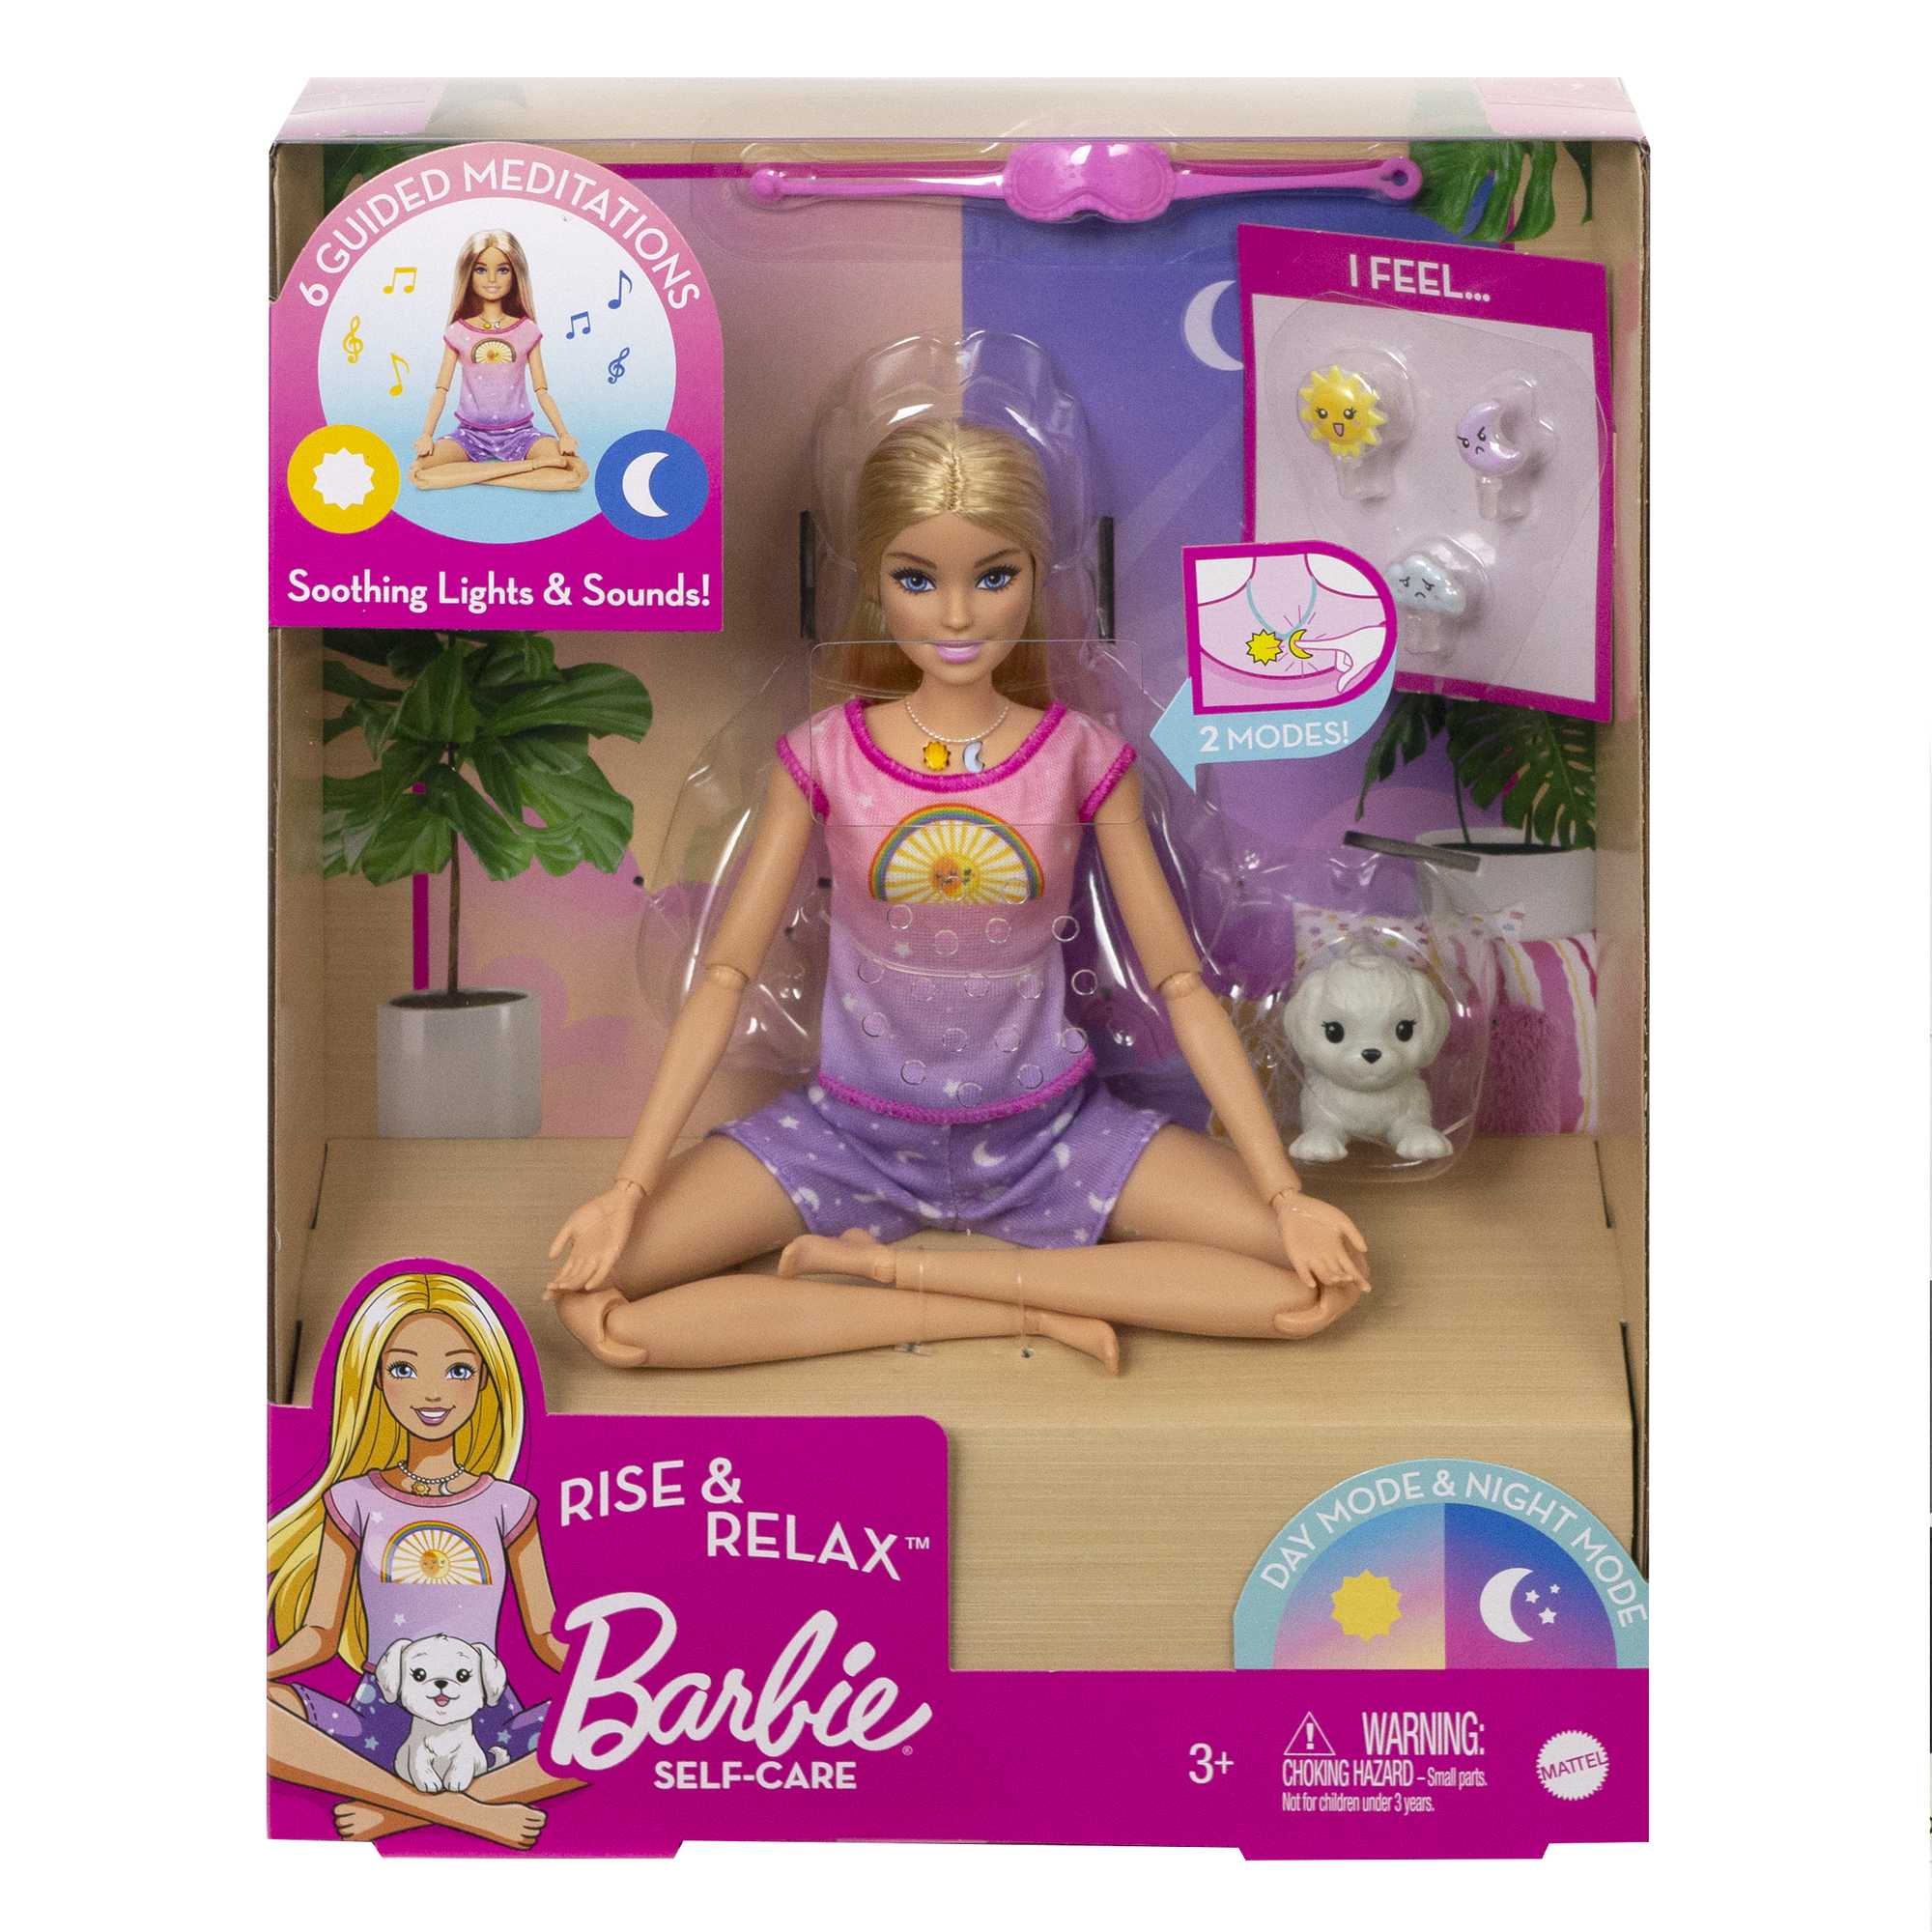 Barbie Puppy Loves Fitness with Red Haired Yoga Barbie Set, 3 Piece - Macy's